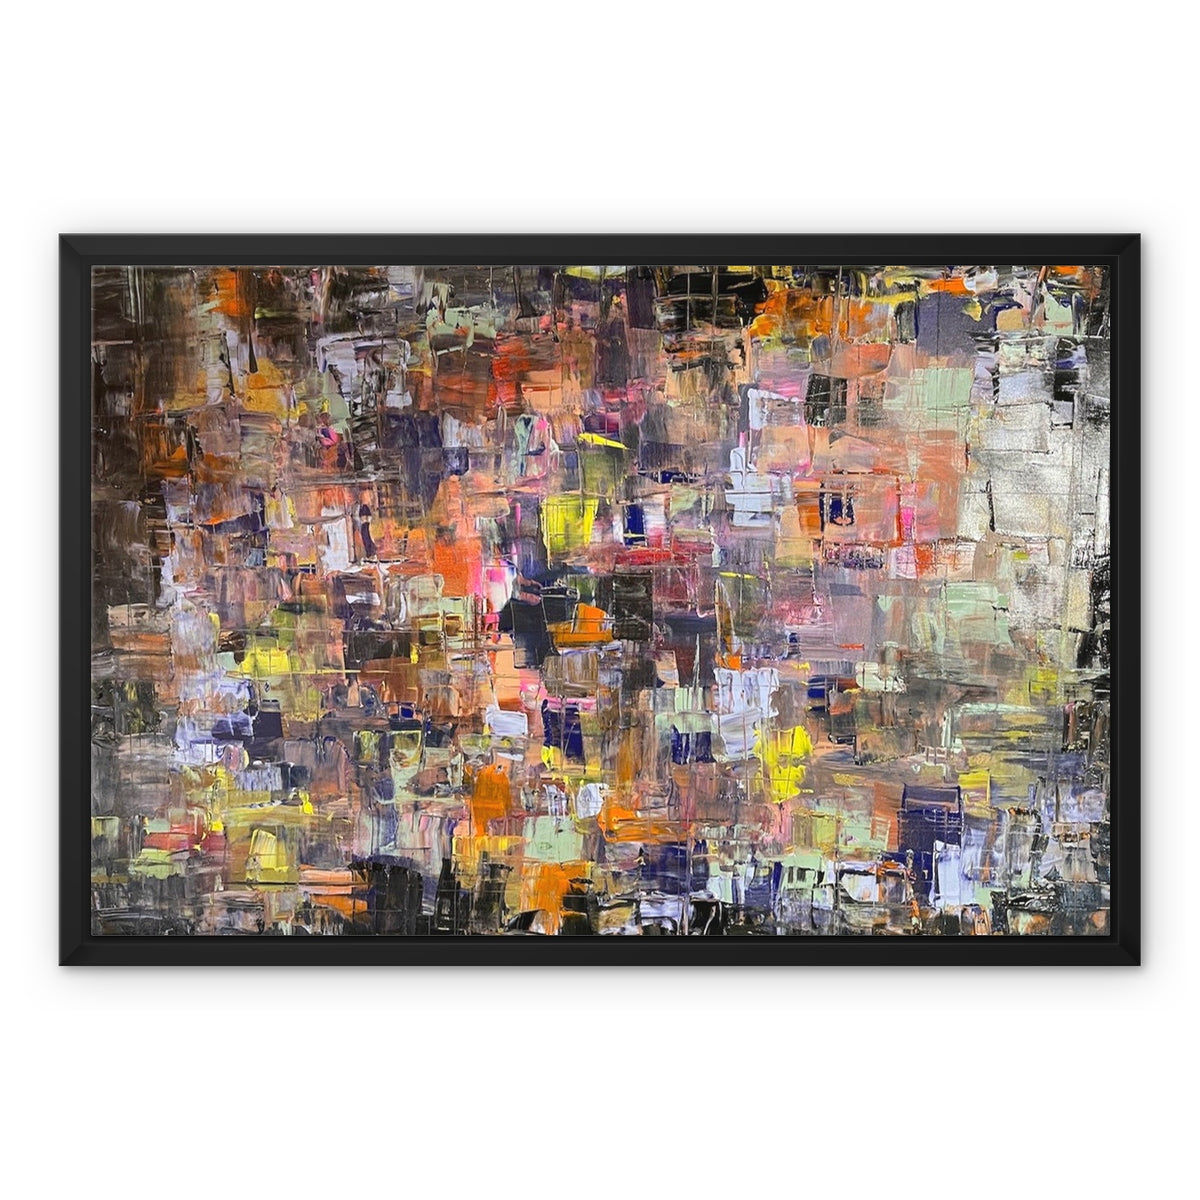 Never Enough Abstract Painting | Framed Canvas From Scotland-Floating Framed Canvas Prints-Abstract & Impressionistic Art Gallery-24"x18"-Paintings, Prints, Homeware, Art Gifts From Scotland By Scottish Artist Kevin Hunter